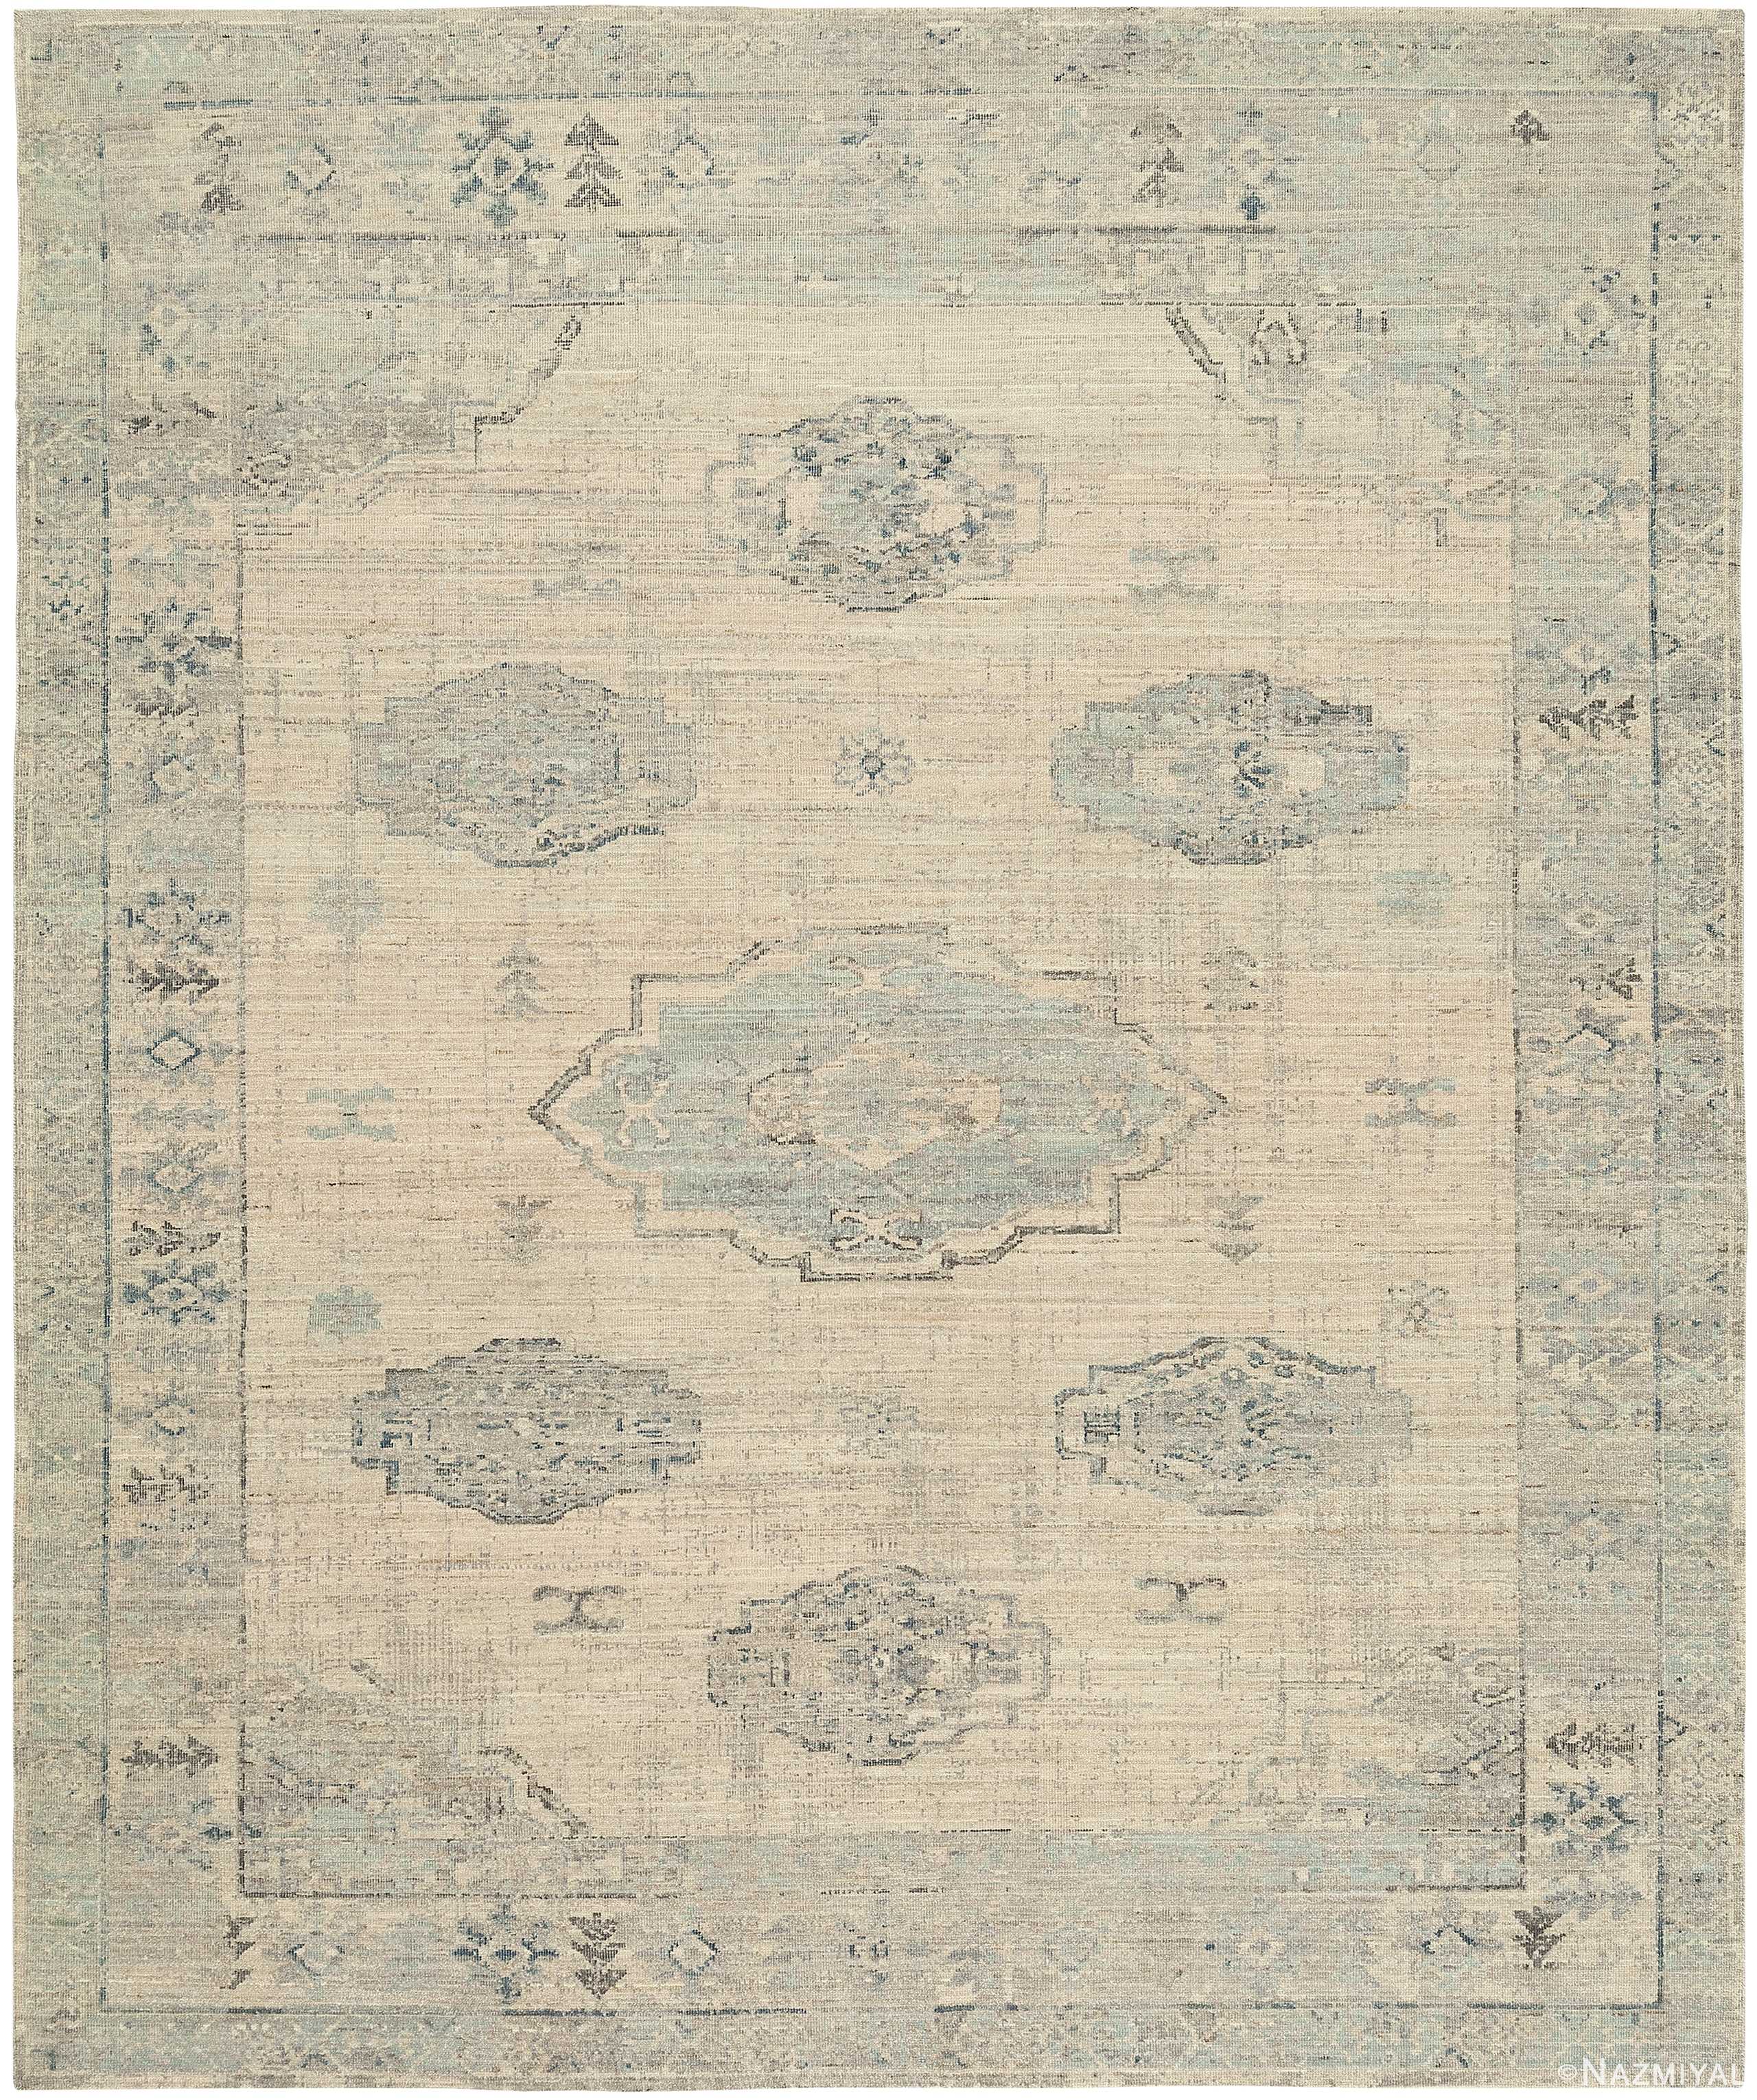 Decorative Ivory Blue Modern Boutique Rug 60725 by Nazmiyal Antique Rugs